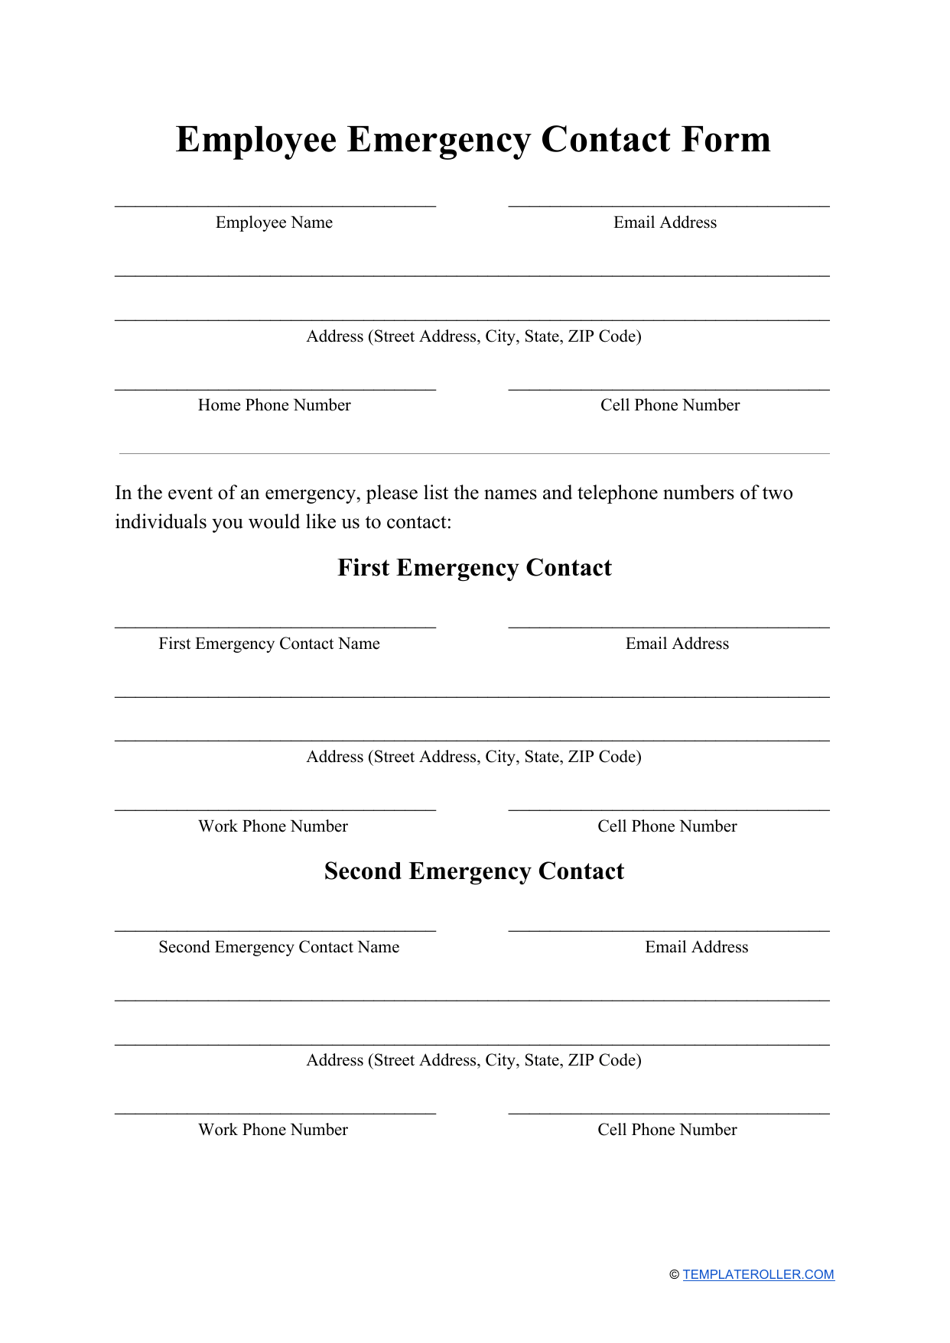 Employee Emergency Contact Form Download Printable Pdf Templateroller